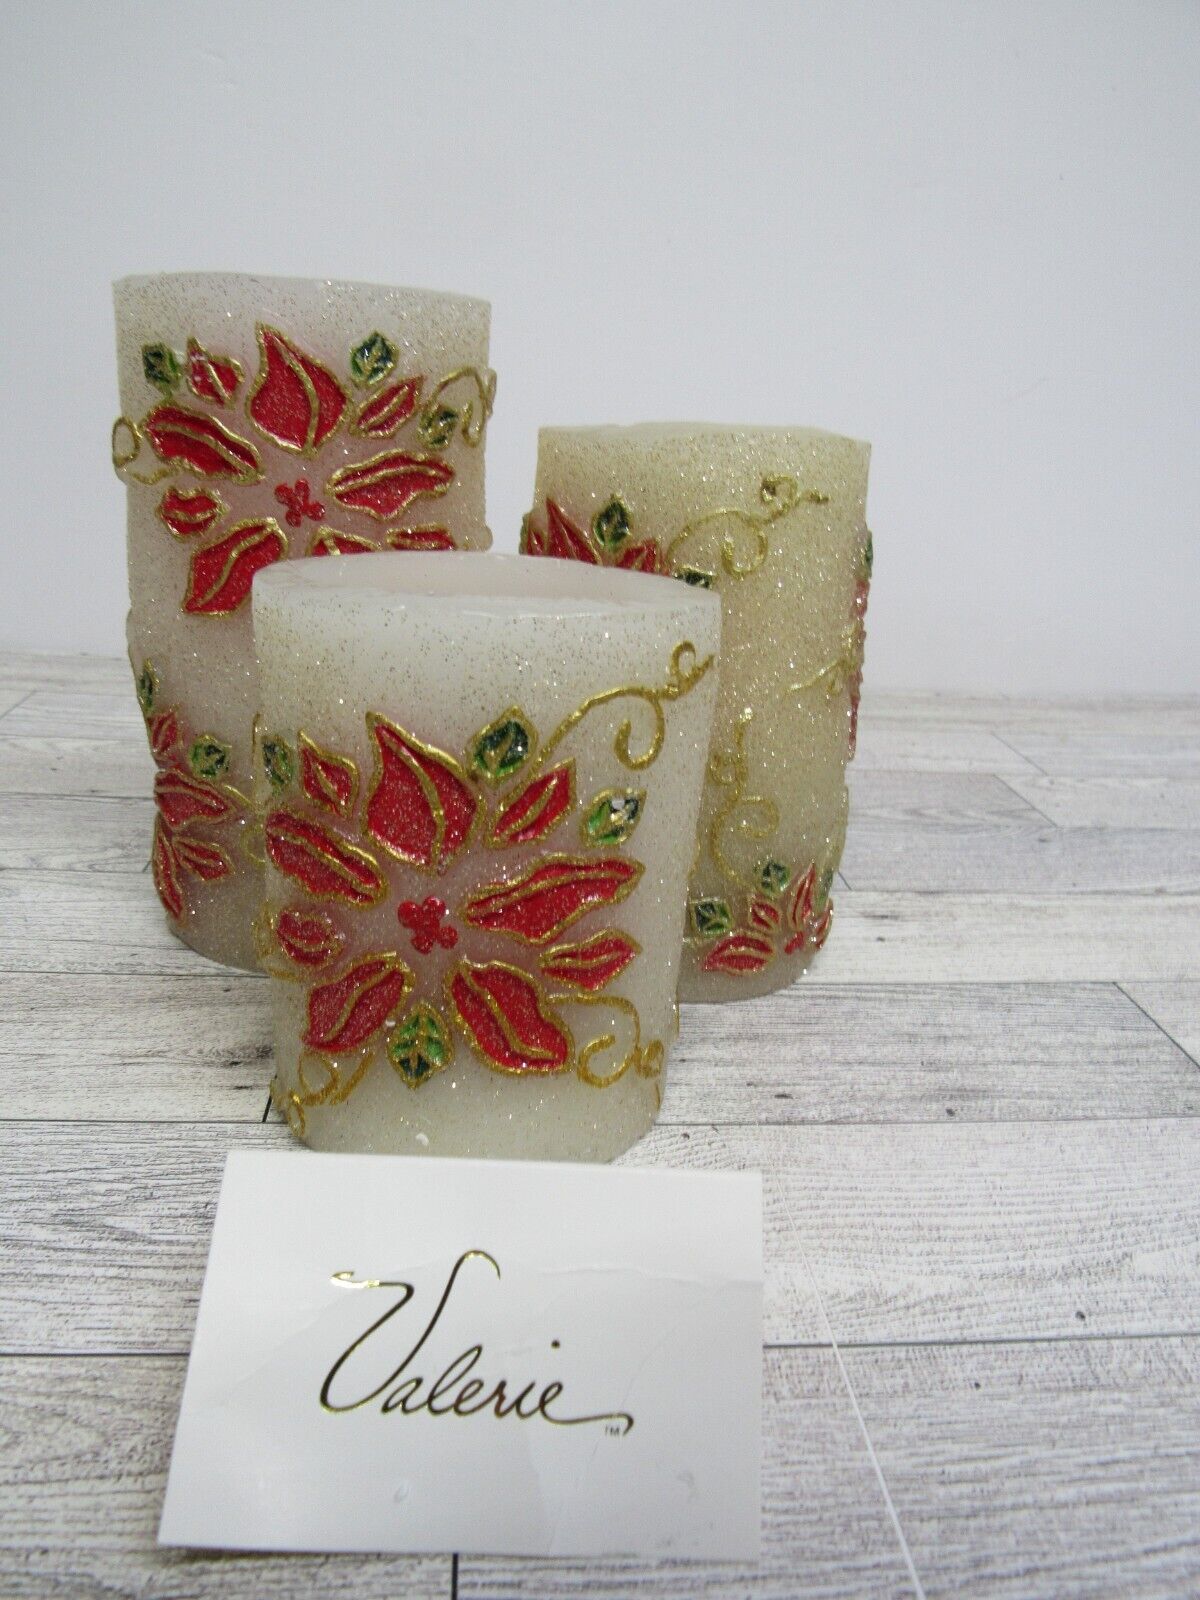 Valerie parr hill bay leaf collection poinsettia embossed flameless candle.